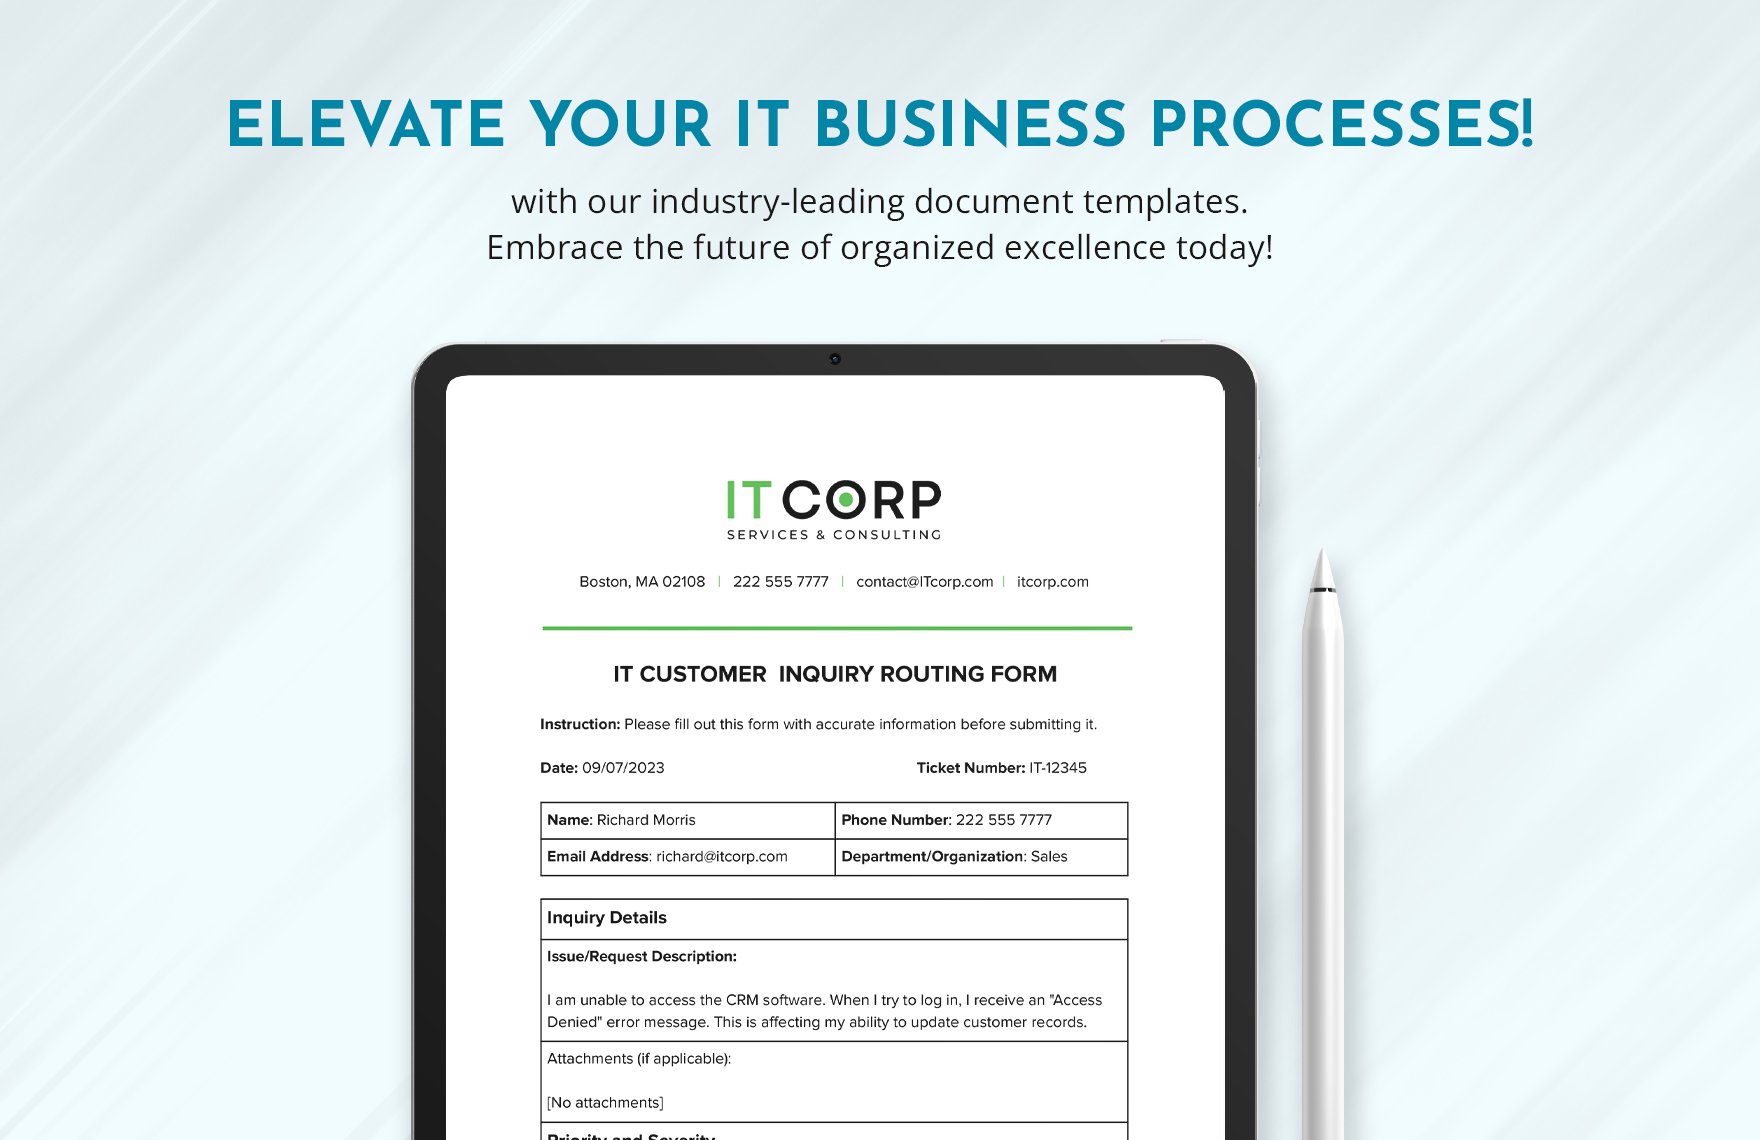 IT Customer Inquiry Routing Form Template